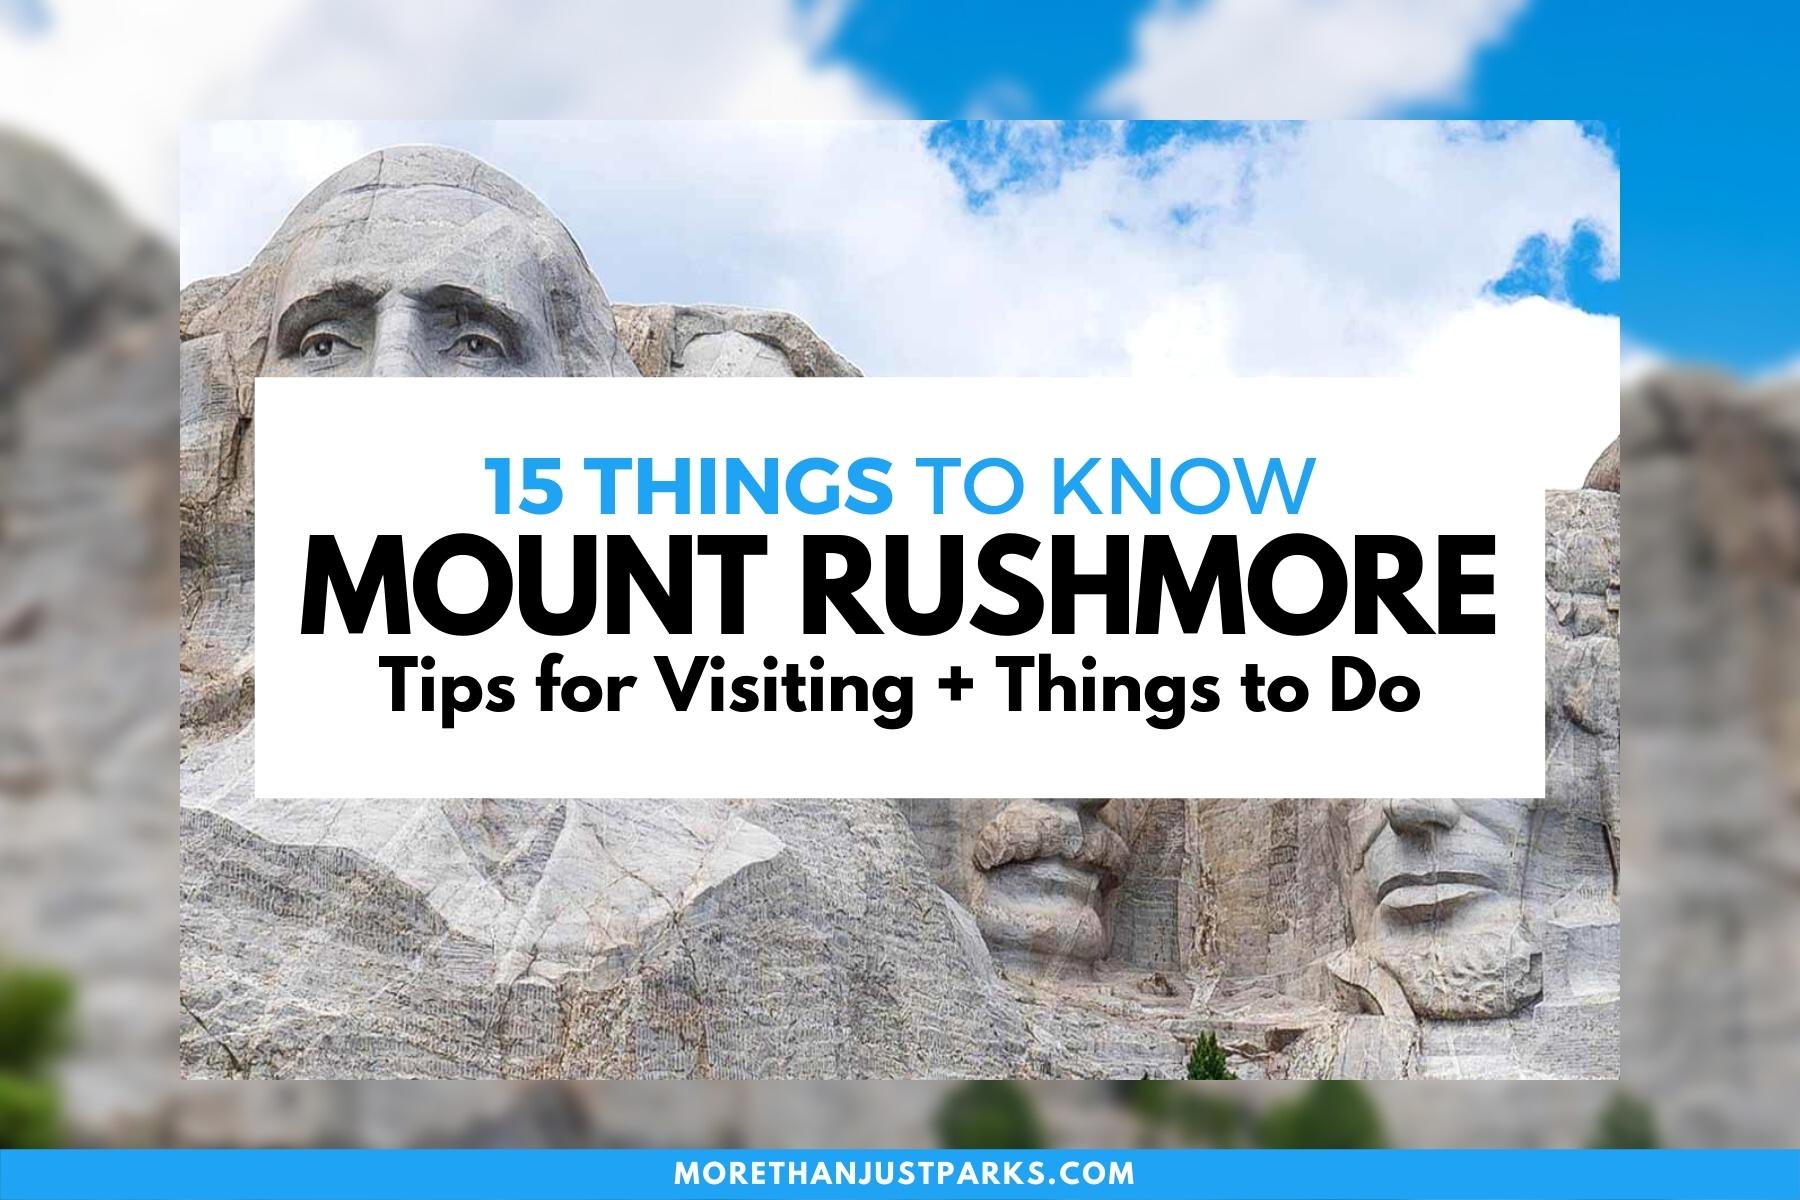 15 HELPFUL Tips for Visiting Mount Rushmore (Things to Do + Photos)